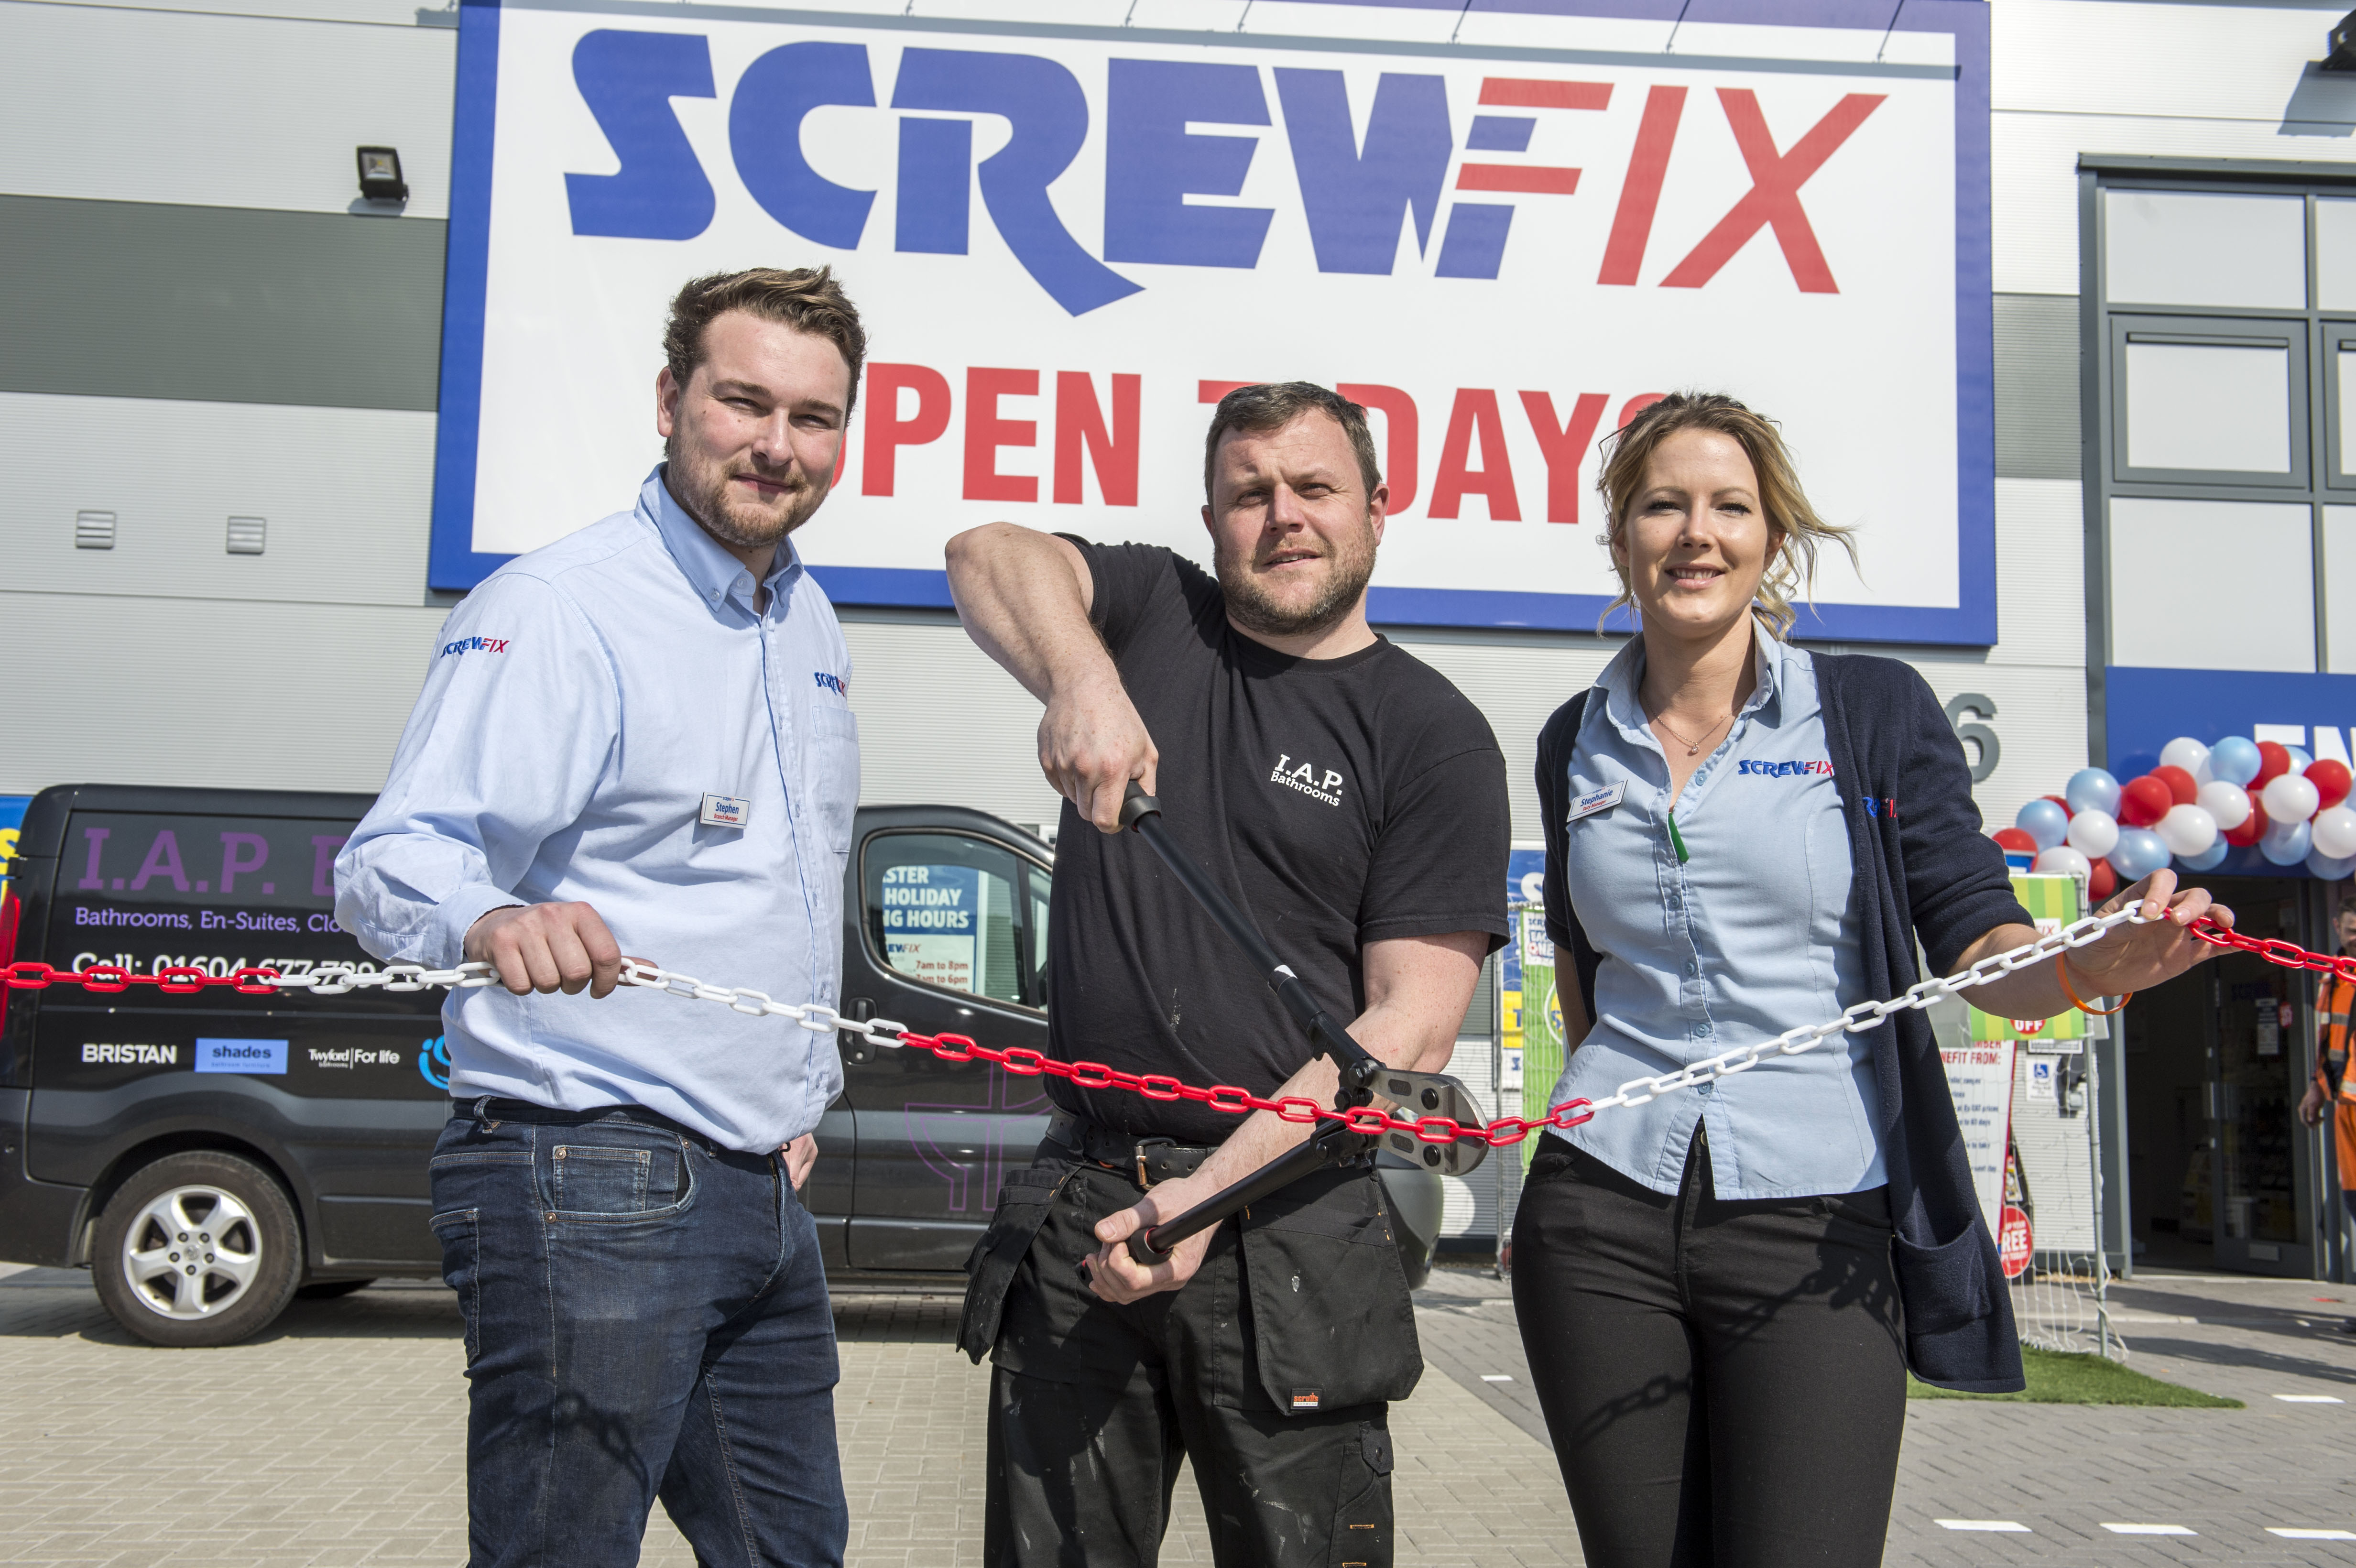 Northampton welcomes second Screwfix store